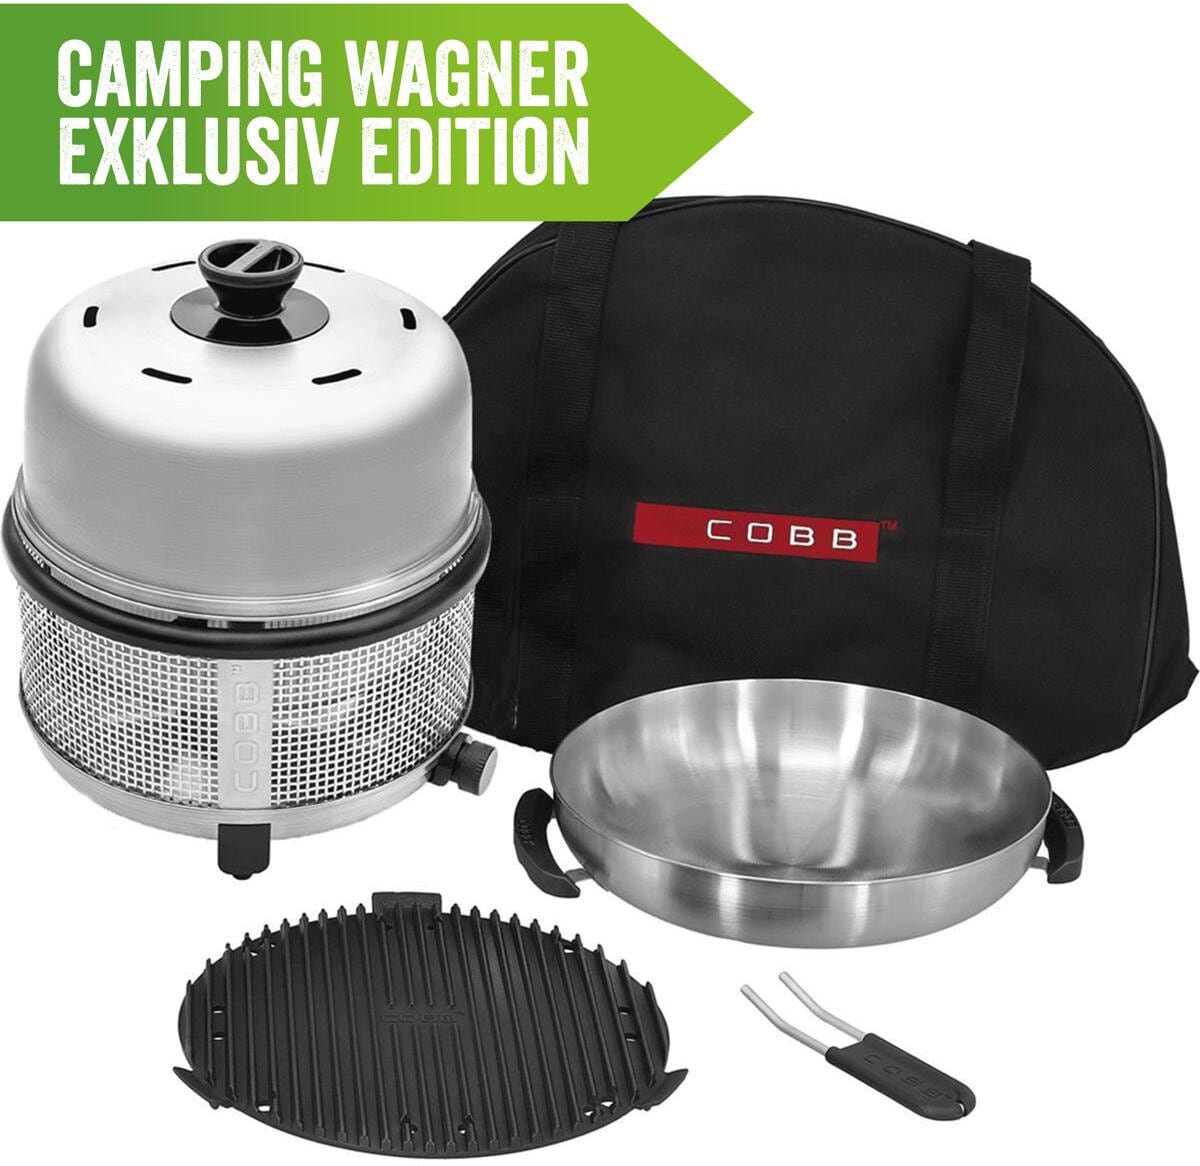 Cobb Premier+ Gas Deluxe Gasgrill (50mbar) inkl. Griddle/Wok/Tasche -  Camping Wagner Edition bei Camping Wagner Campingzubehör